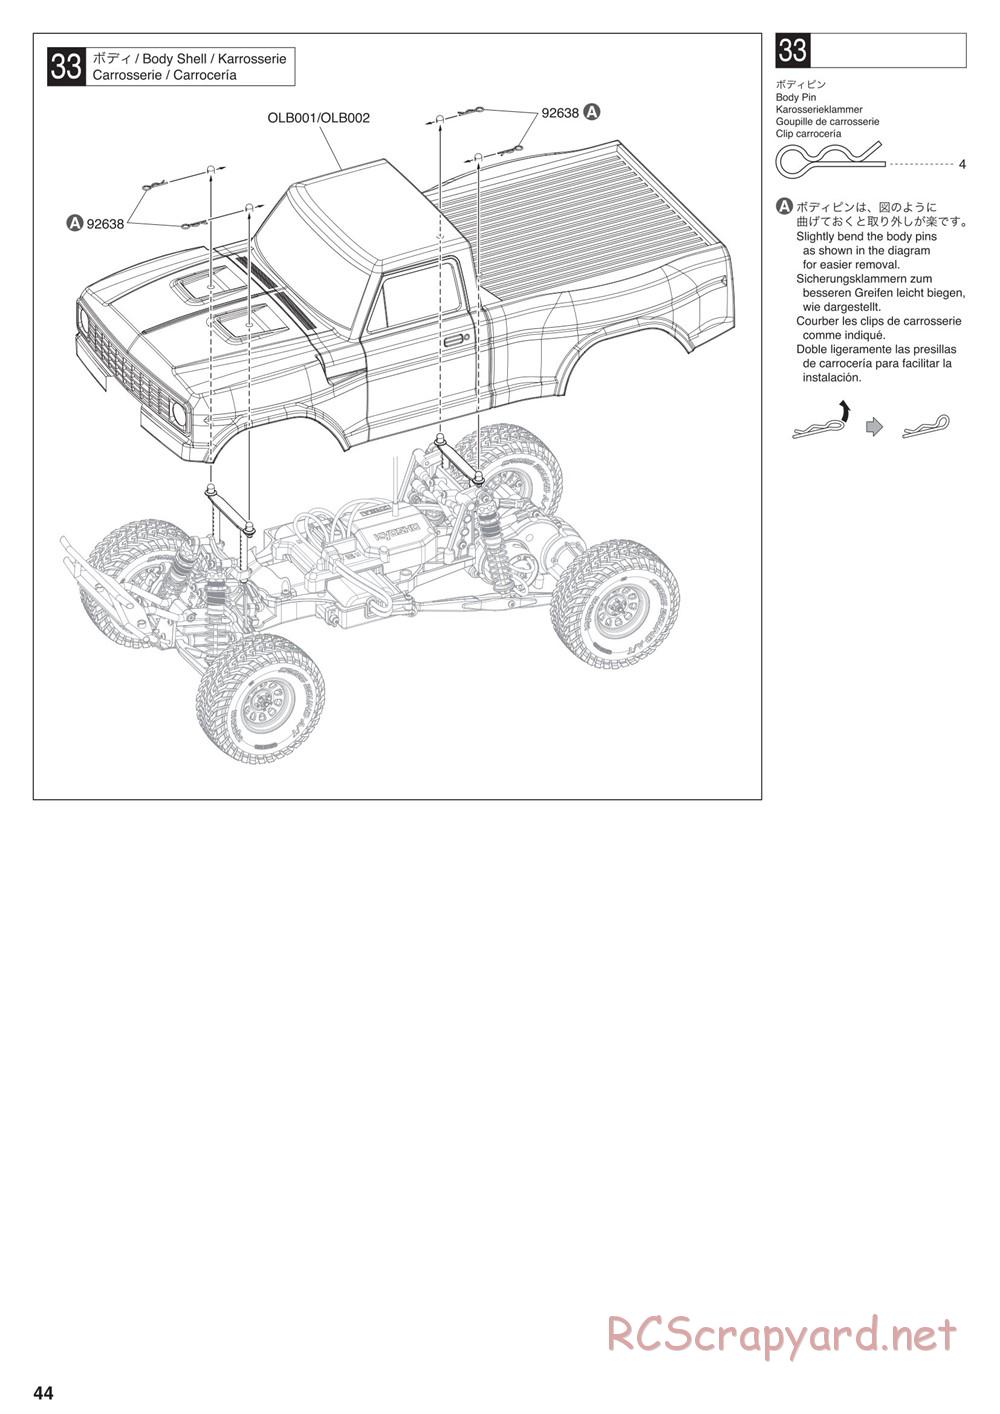 Kyosho - Outlaw Rampage - Manual - Page 44